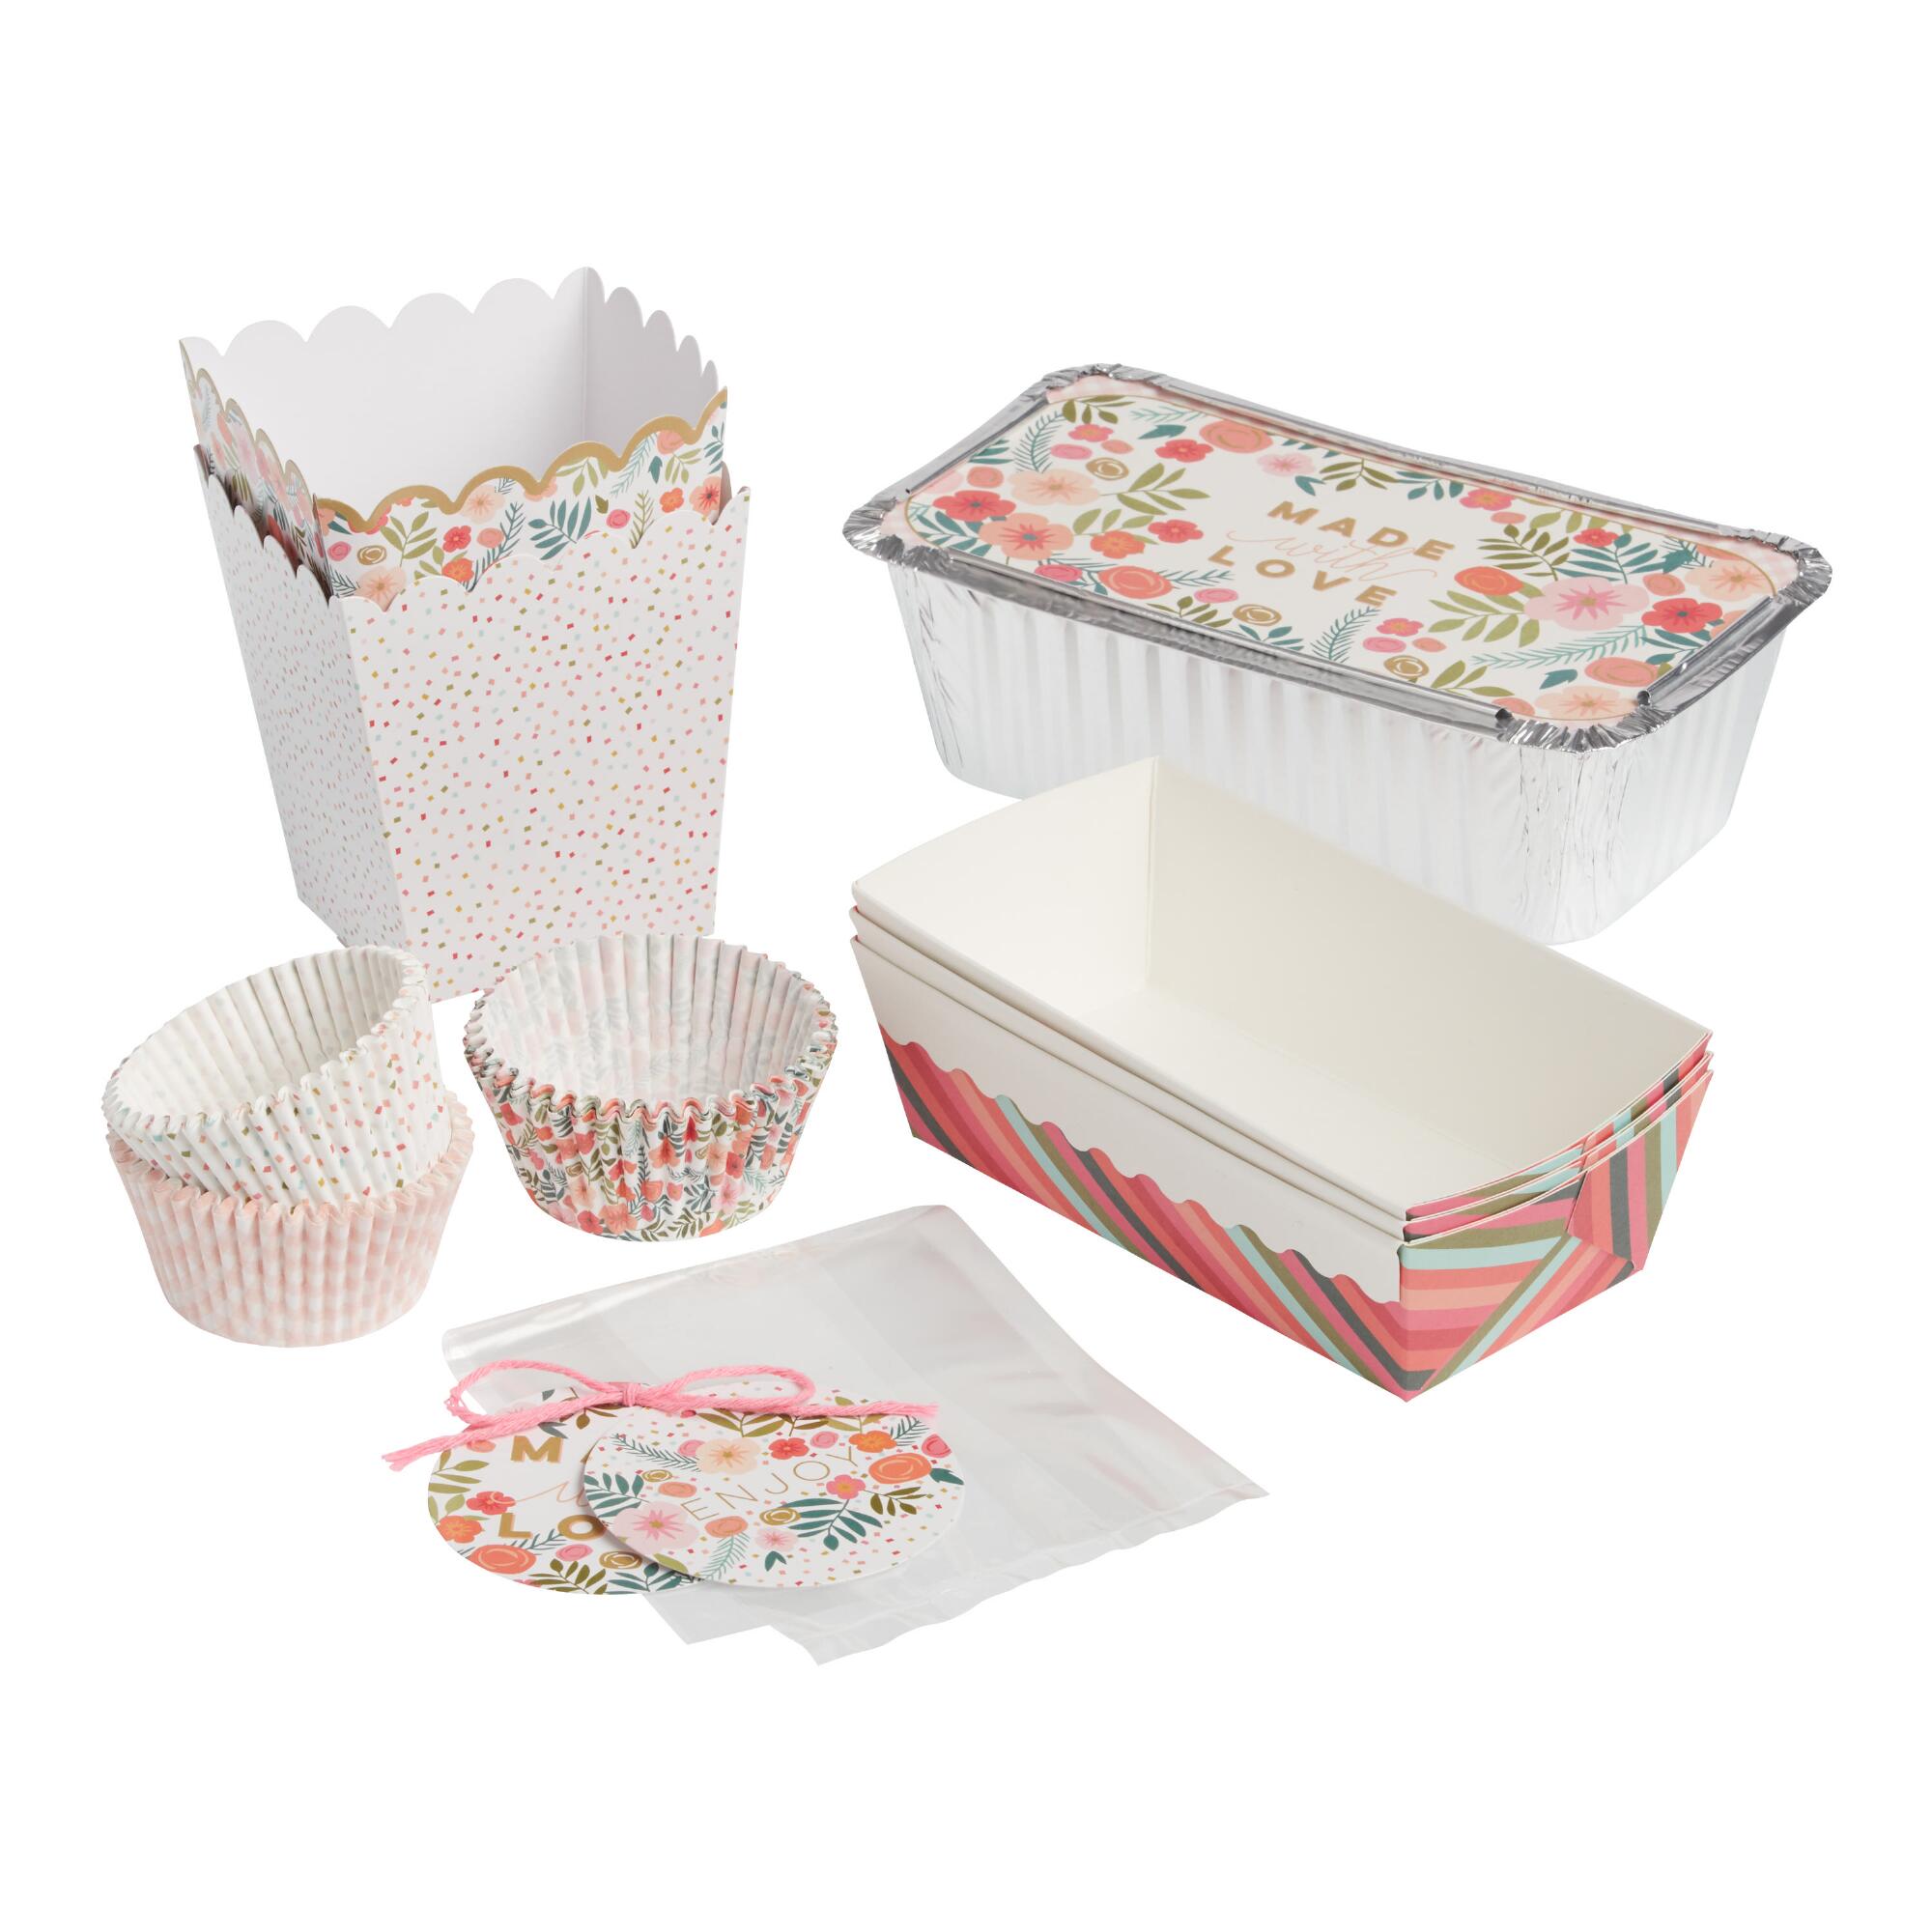 Spring Floral Paper Baking Supplies Collection by World Market